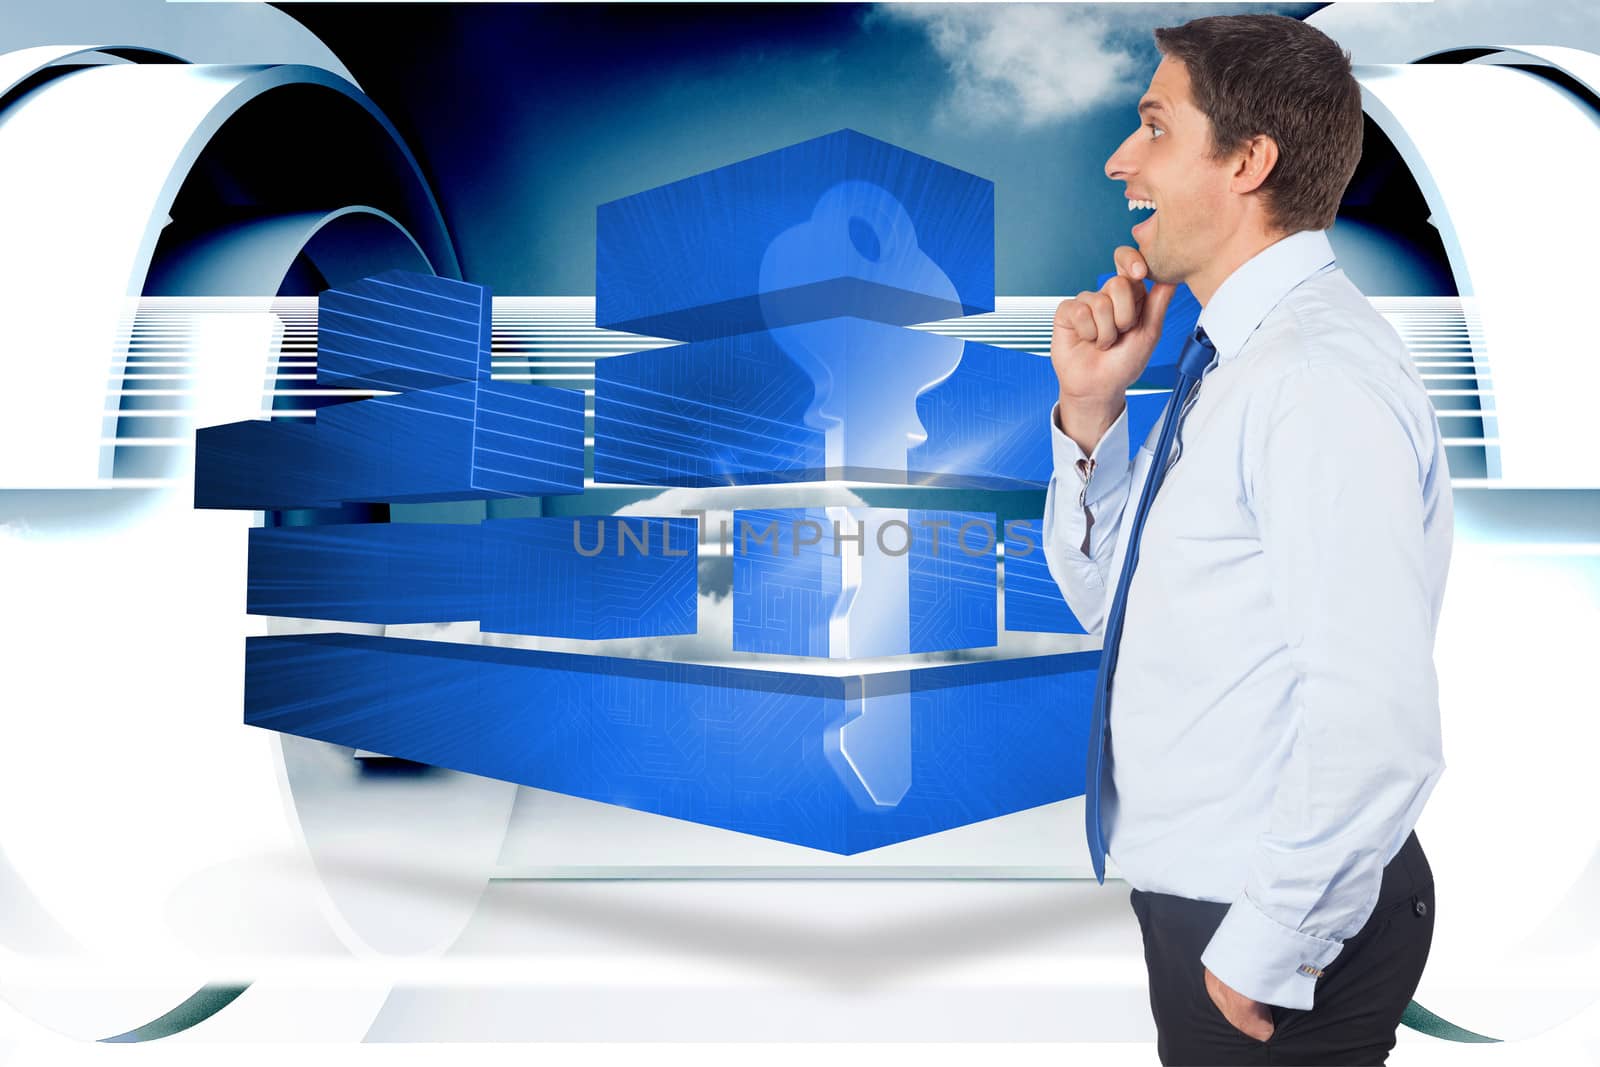 Thinking businessman touching his chin against abstract cloud design in futuristic structure